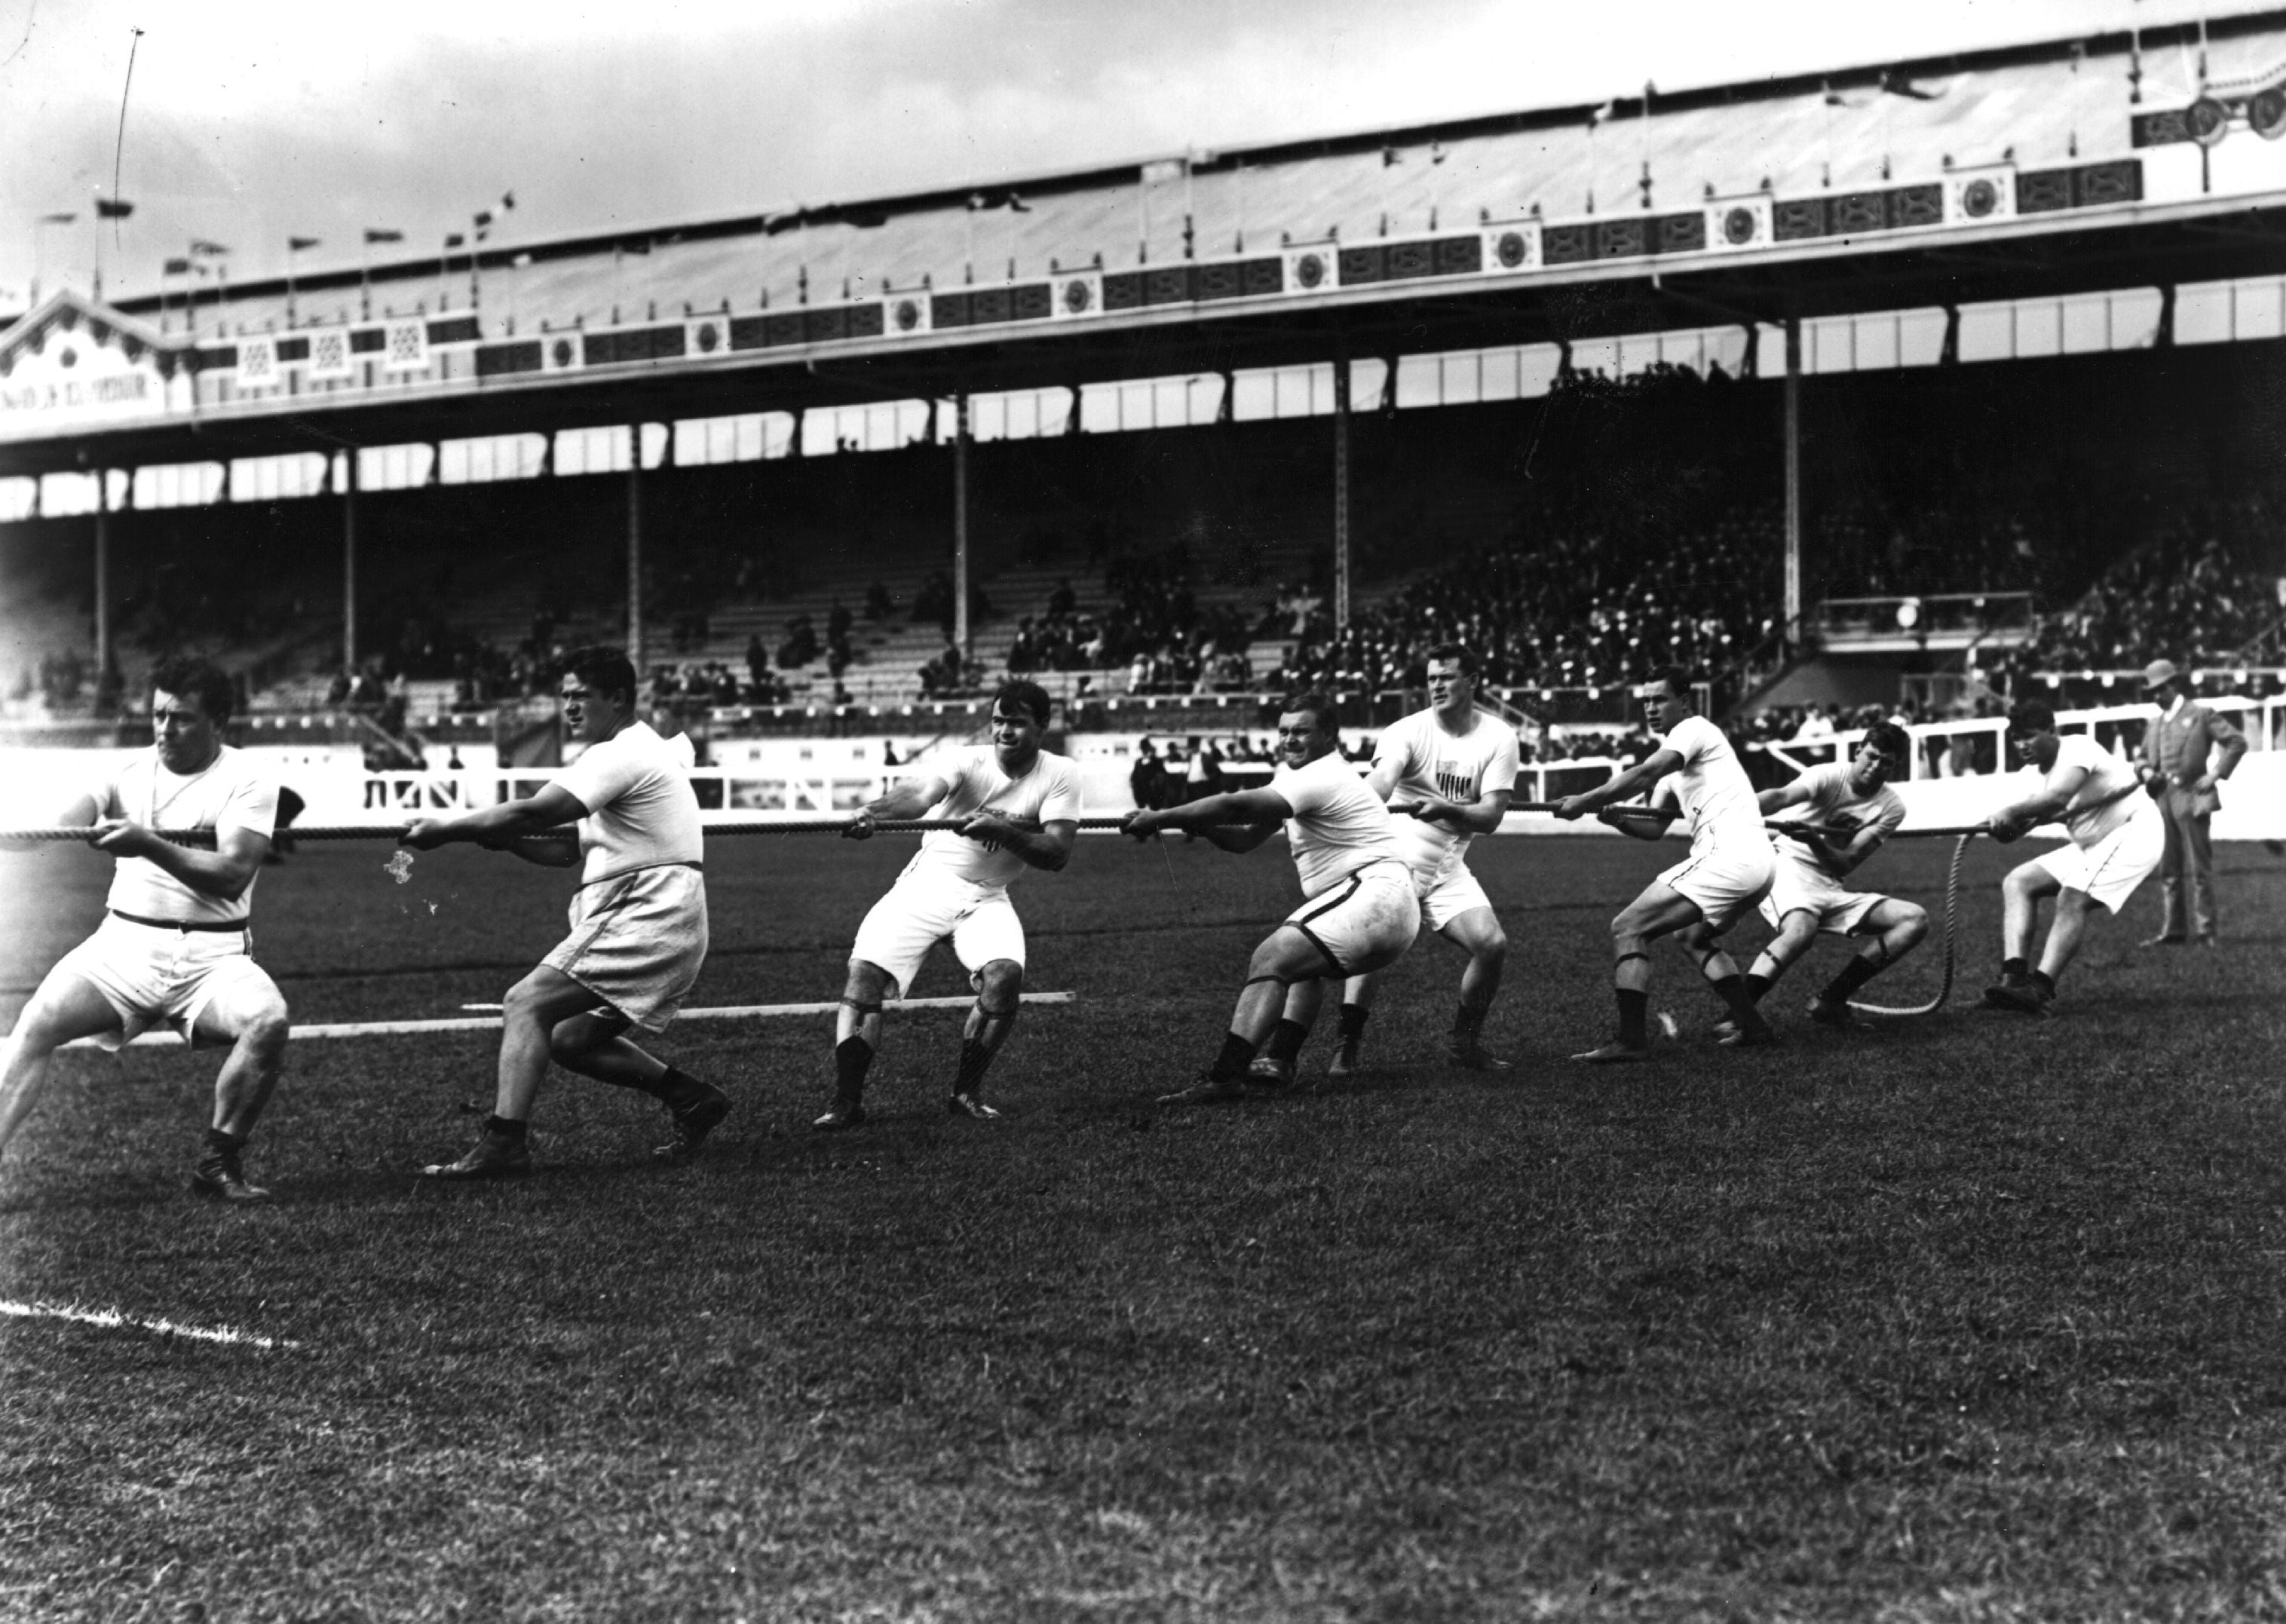 July 1908: The Unites States tug-of-war team in action during the 1908 London Olympics at White City Stadium.